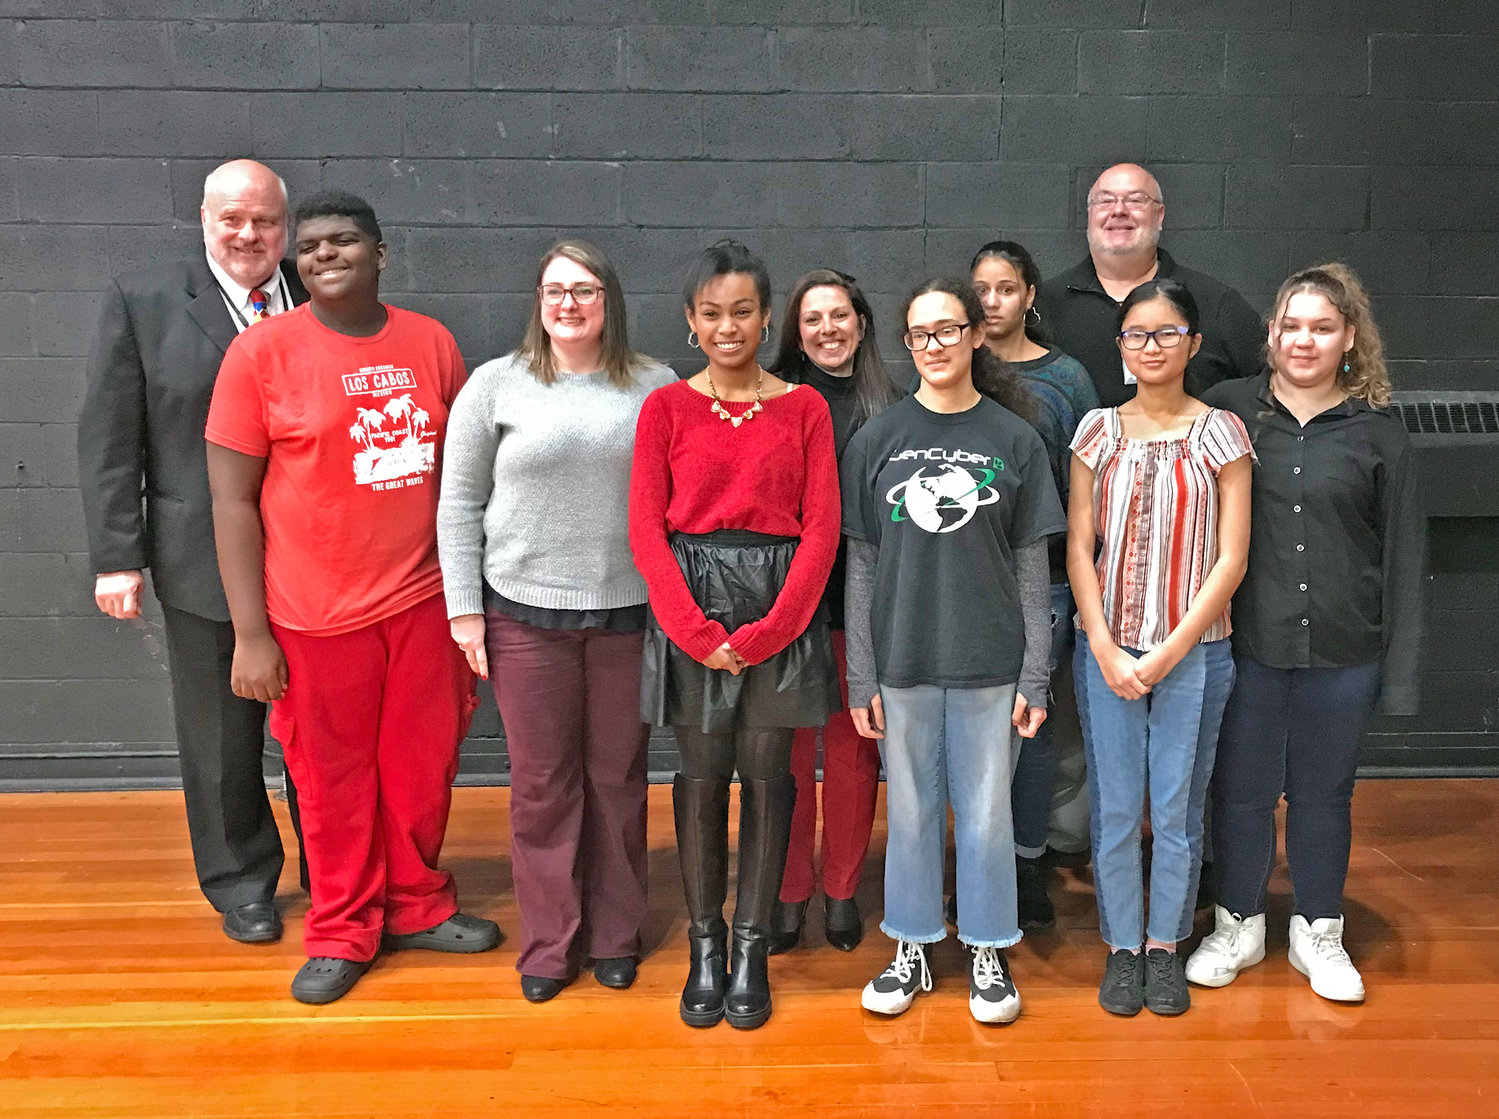 Members of the Proctor High School Newspaper Club pose Dec. 13 with district Superintendent Brian Nolan, left, during the board's meeting at the Kernan Elementary School in Utica.